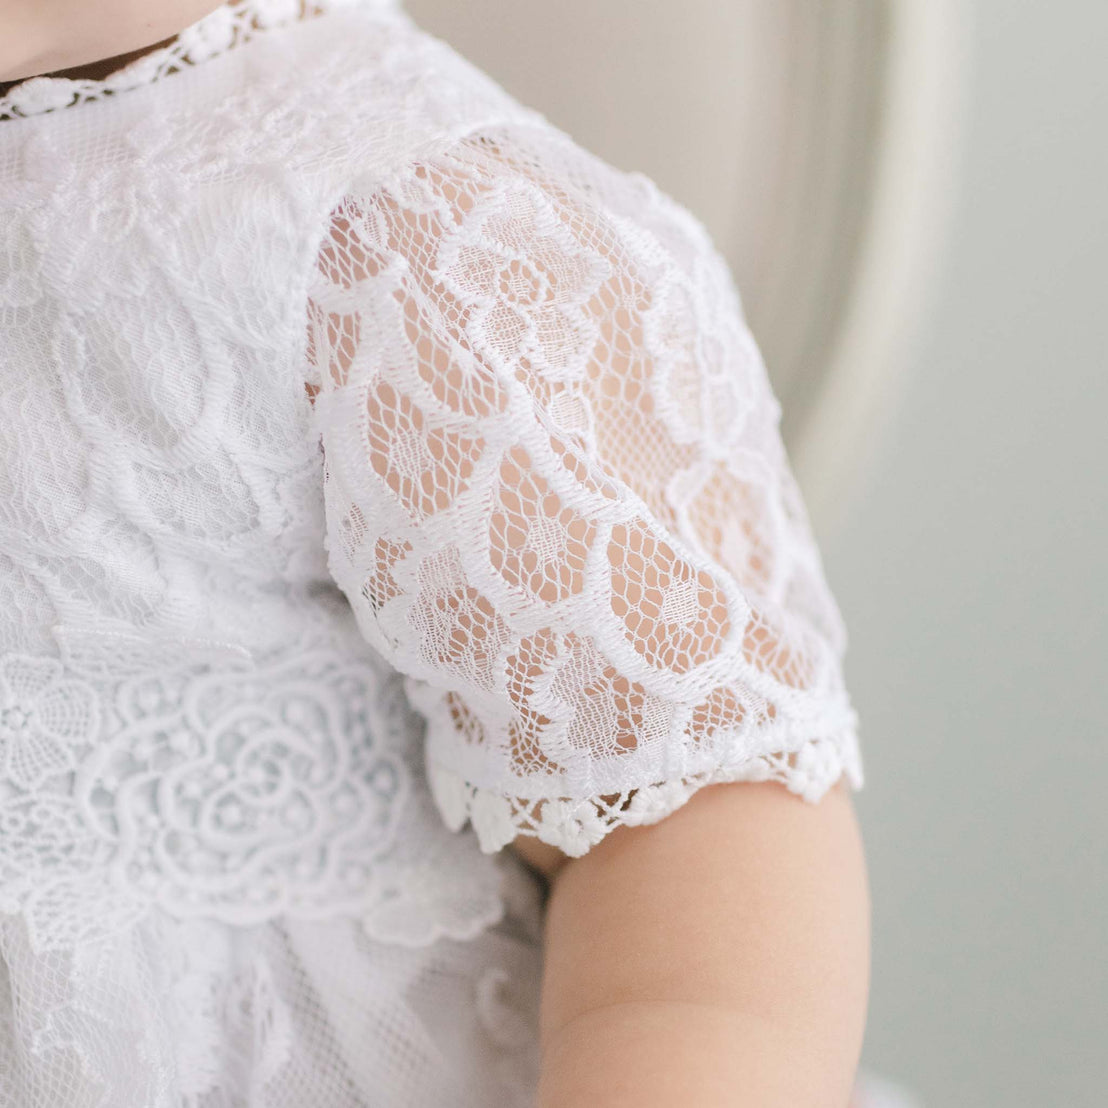 Close-up of a child's shoulder wearing the Olivia Christening Gown & Bonnet, highlighting the intricate floral pattern and scalloped edges of the fabric for a christening.